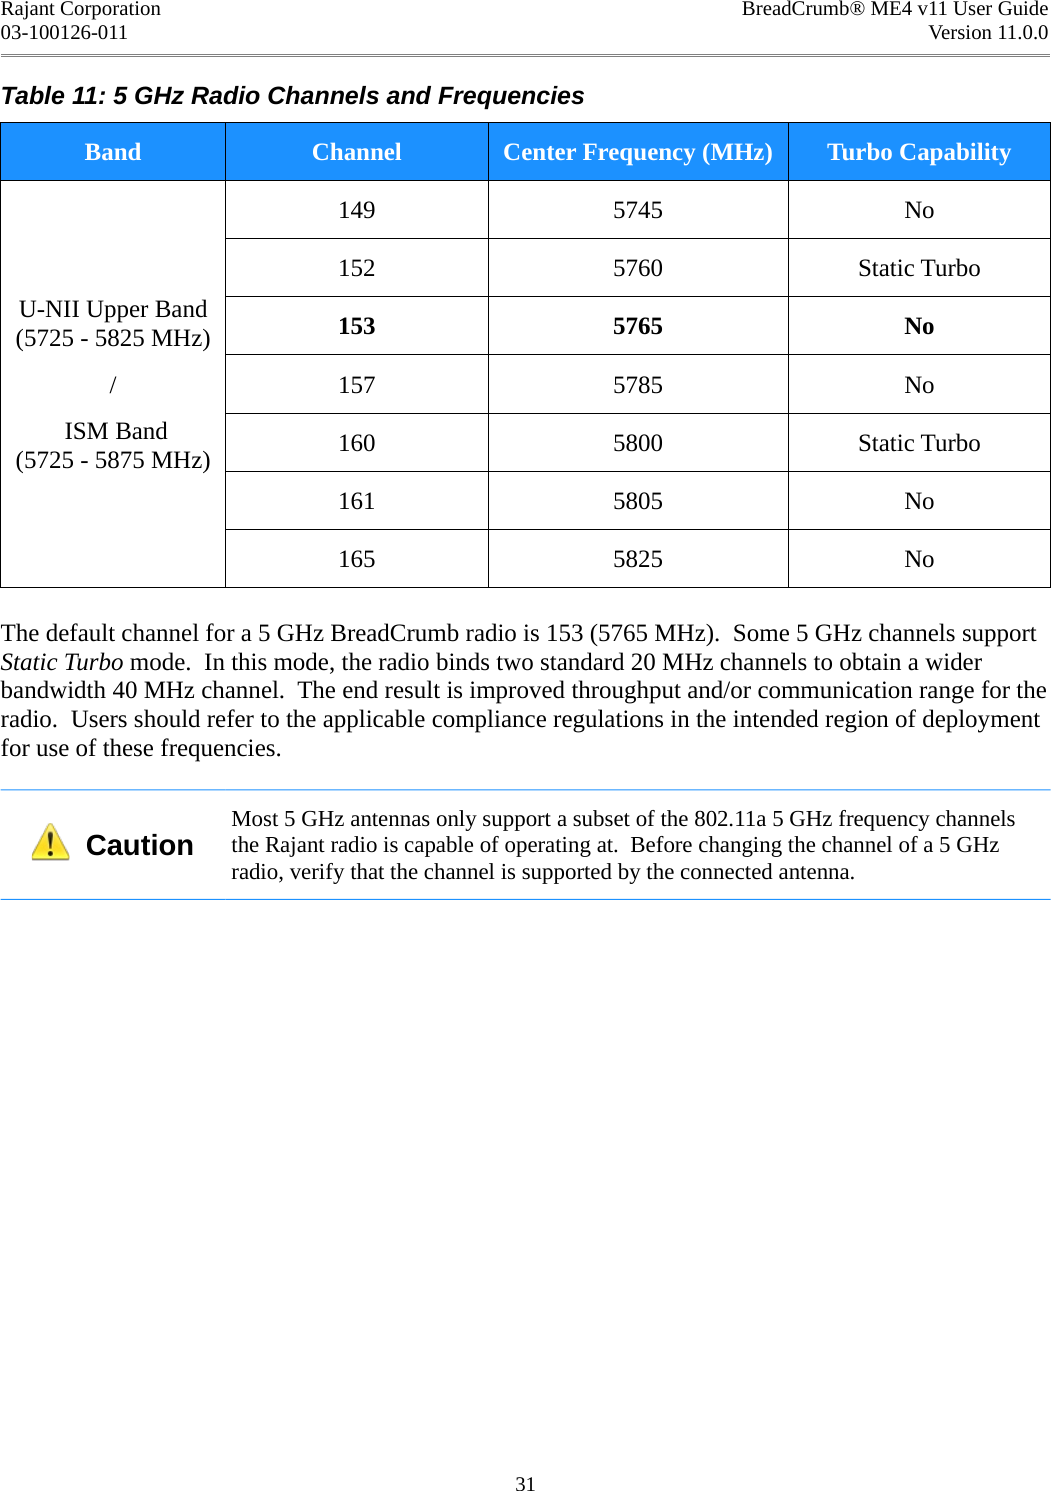 Rajant Corporation BreadCrumb® ME4 v11 User Guide03-100126-011 Version 11.0.0Table 11: 5 GHz Radio Channels and FrequenciesBand Channel Center Frequency (MHz) Turbo CapabilityU-NII Upper Band (5725 - 5825 MHz)/ ISM Band(5725 - 5875 MHz)149 5745 No152 5760 Static Turbo153 5765 No157 5785 No160 5800 Static Turbo161 5805 No165 5825 NoThe default channel for a 5 GHz BreadCrumb radio is 153 (5765 MHz).  Some 5 GHz channels support Static Turbo mode.  In this mode, the radio binds two standard 20 MHz channels to obtain a wider bandwidth 40 MHz channel.  The end result is improved throughput and/or communication range for the radio.  Users should refer to the applicable compliance regulations in the intended region of deployment for use of these frequencies.  CautionMost 5 GHz antennas only support a subset of the 802.11a 5 GHz frequency channels the Rajant radio is capable of operating at.  Before changing the channel of a 5 GHz radio, verify that the channel is supported by the connected antenna.31